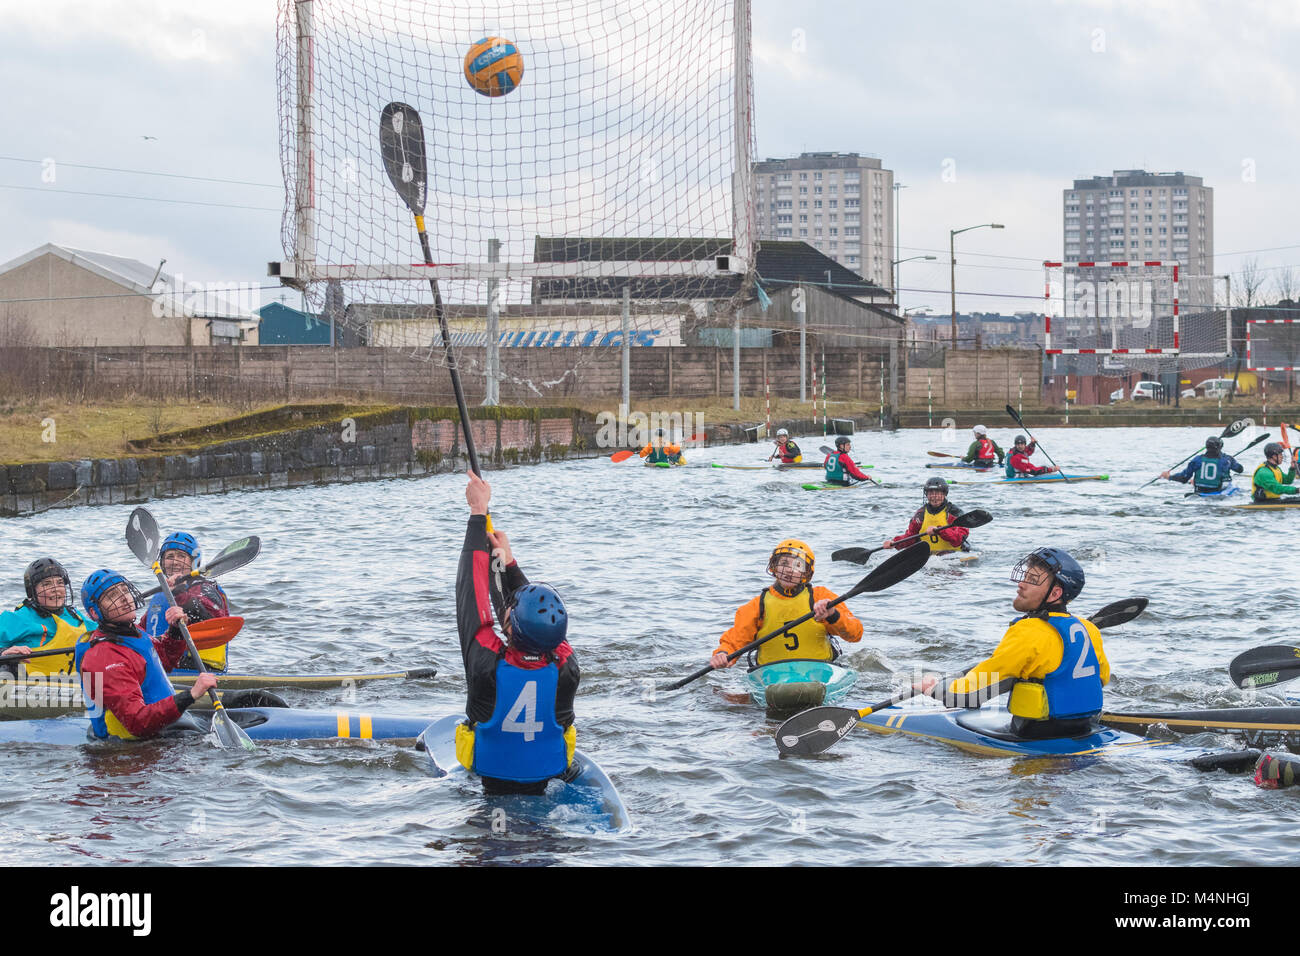 Glasgow, Scotland. 17th Feb, 2018. uk weather - freezing cold water on a grey day in Glasgow doesn't deter competitors in the 2018 Scottish University Sport (SUS) canoe polo competition.  Students battle it out at Pinkston Watersports centre in Glasgow Credit: Kay Roxby/Alamy Live News Stock Photo